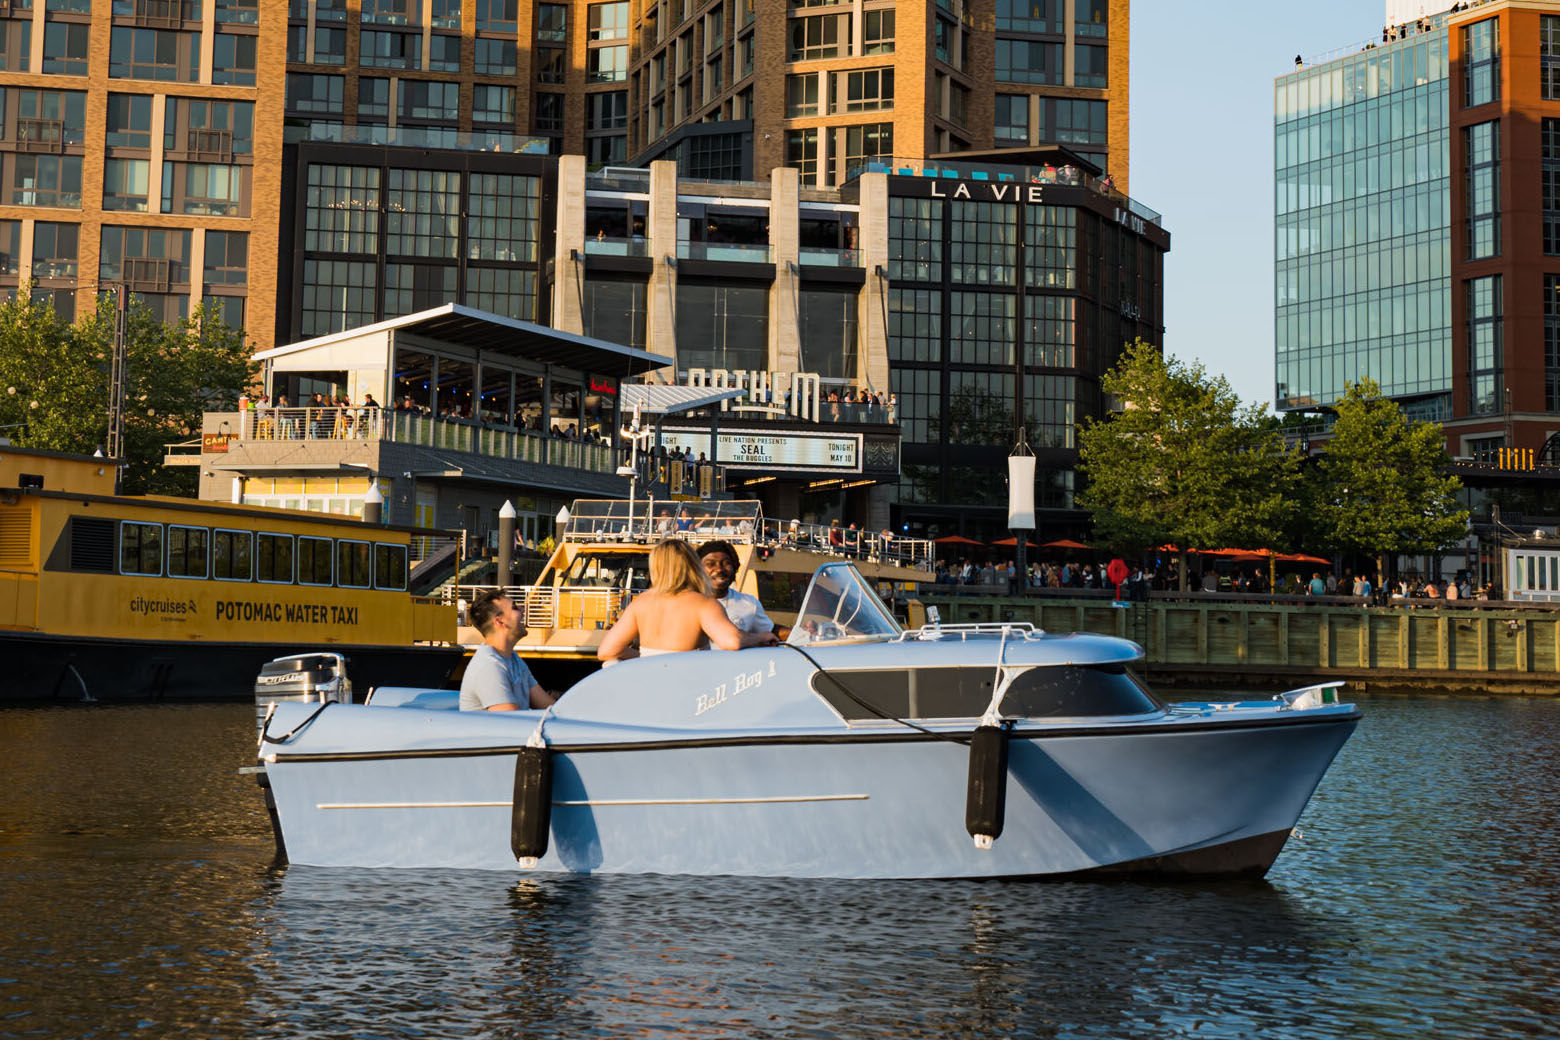 The two new power boats, Gladys and Violet, are styled with fins, retro colors and chrome detailing. (Courtesy Sea Suite Cruises)